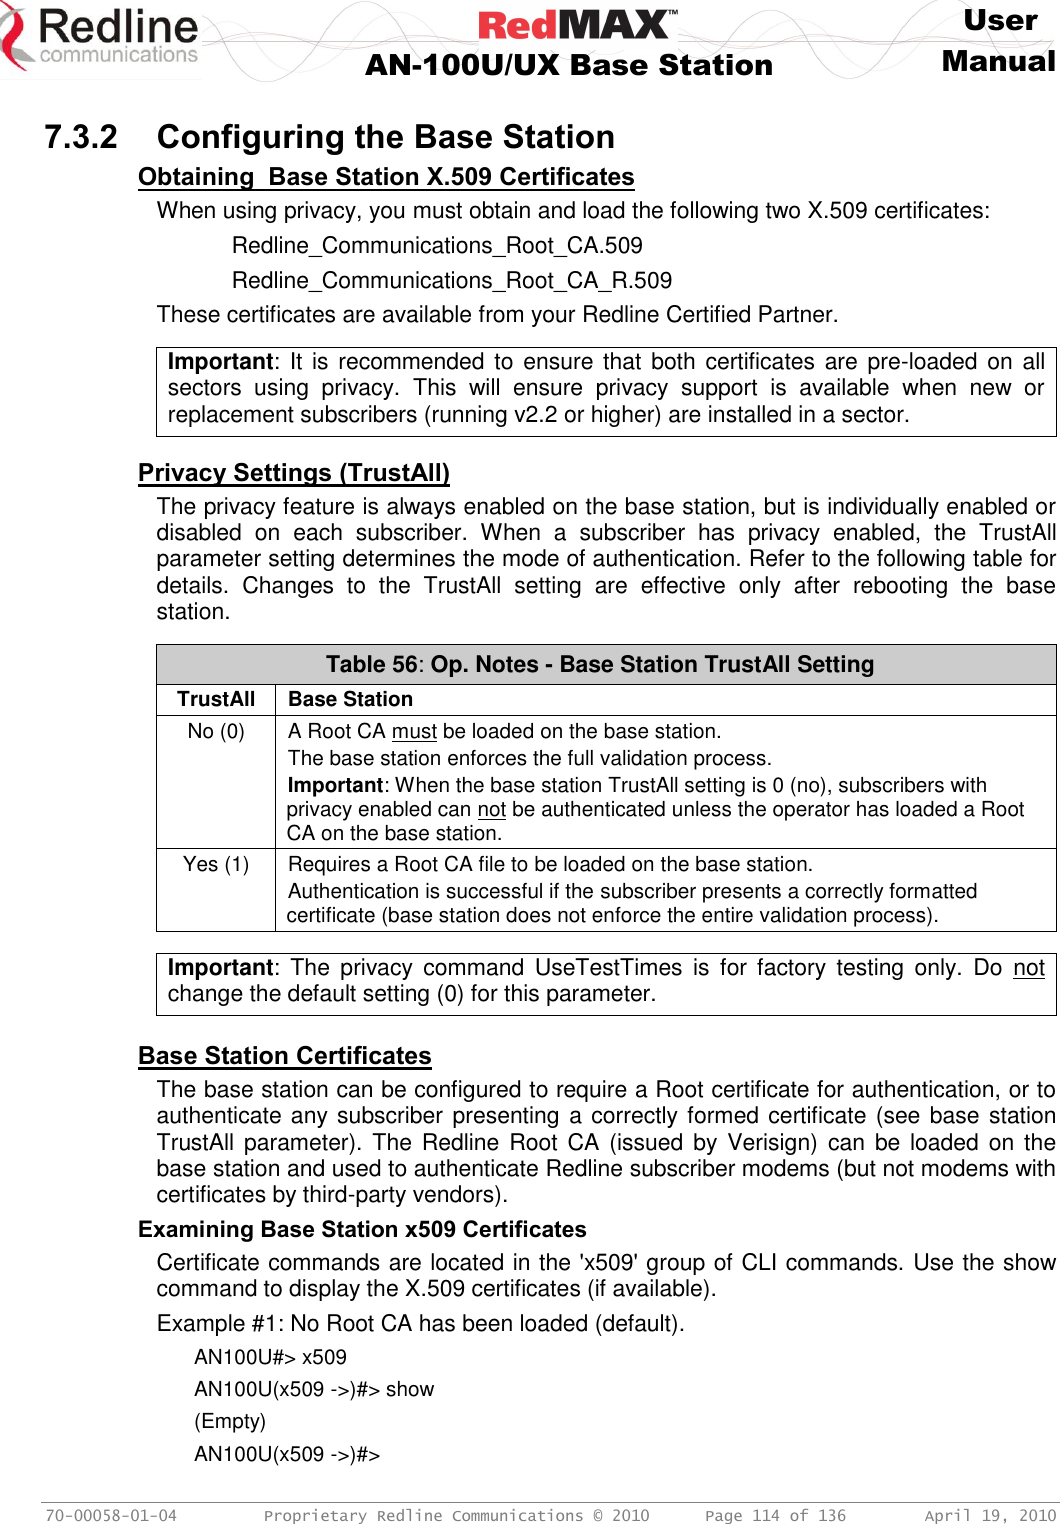     User  AN-100U/UX Base Station Manual   70-00058-01-04  Proprietary Redline Communications © 2010   Page 114 of 136  April 19, 2010  7.3.2 Configuring the Base Station Obtaining  Base Station X.509 Certificates When using privacy, you must obtain and load the following two X.509 certificates:   Redline_Communications_Root_CA.509   Redline_Communications_Root_CA_R.509 These certificates are available from your Redline Certified Partner.  Important: It is recommended to ensure that  both certificates are pre-loaded on all sectors  using  privacy.  This  will  ensure  privacy  support  is  available  when  new  or replacement subscribers (running v2.2 or higher) are installed in a sector.   Privacy Settings (TrustAll) The privacy feature is always enabled on the base station, but is individually enabled or disabled  on  each  subscriber.  When  a  subscriber  has  privacy  enabled,  the  TrustAll parameter setting determines the mode of authentication. Refer to the following table for details.  Changes  to  the  TrustAll  setting  are  effective  only  after  rebooting  the  base station.  Table 56: Op. Notes - Base Station TrustAll Setting TrustAll Base Station No (0) A Root CA must be loaded on the base station. The base station enforces the full validation process.  Important: When the base station TrustAll setting is 0 (no), subscribers with privacy enabled can not be authenticated unless the operator has loaded a Root CA on the base station. Yes (1) Requires a Root CA file to be loaded on the base station. Authentication is successful if the subscriber presents a correctly formatted certificate (base station does not enforce the entire validation process).   Important:  The  privacy  command  UseTestTimes  is  for  factory  testing  only.  Do  not change the default setting (0) for this parameter.  Base Station Certificates The base station can be configured to require a Root certificate for authentication, or to authenticate any subscriber presenting a correctly formed certificate (see base station TrustAll parameter). The Redline  Root  CA  (issued  by Verisign)  can  be loaded on  the base station and used to authenticate Redline subscriber modems (but not modems with certificates by third-party vendors).  Examining Base Station x509 Certificates Certificate commands are located in the &apos;x509&apos; group of CLI commands. Use the show command to display the X.509 certificates (if available).  Example #1: No Root CA has been loaded (default). AN100U#&gt; x509 AN100U(x509 -&gt;)#&gt; show (Empty) AN100U(x509 -&gt;)#&gt; 